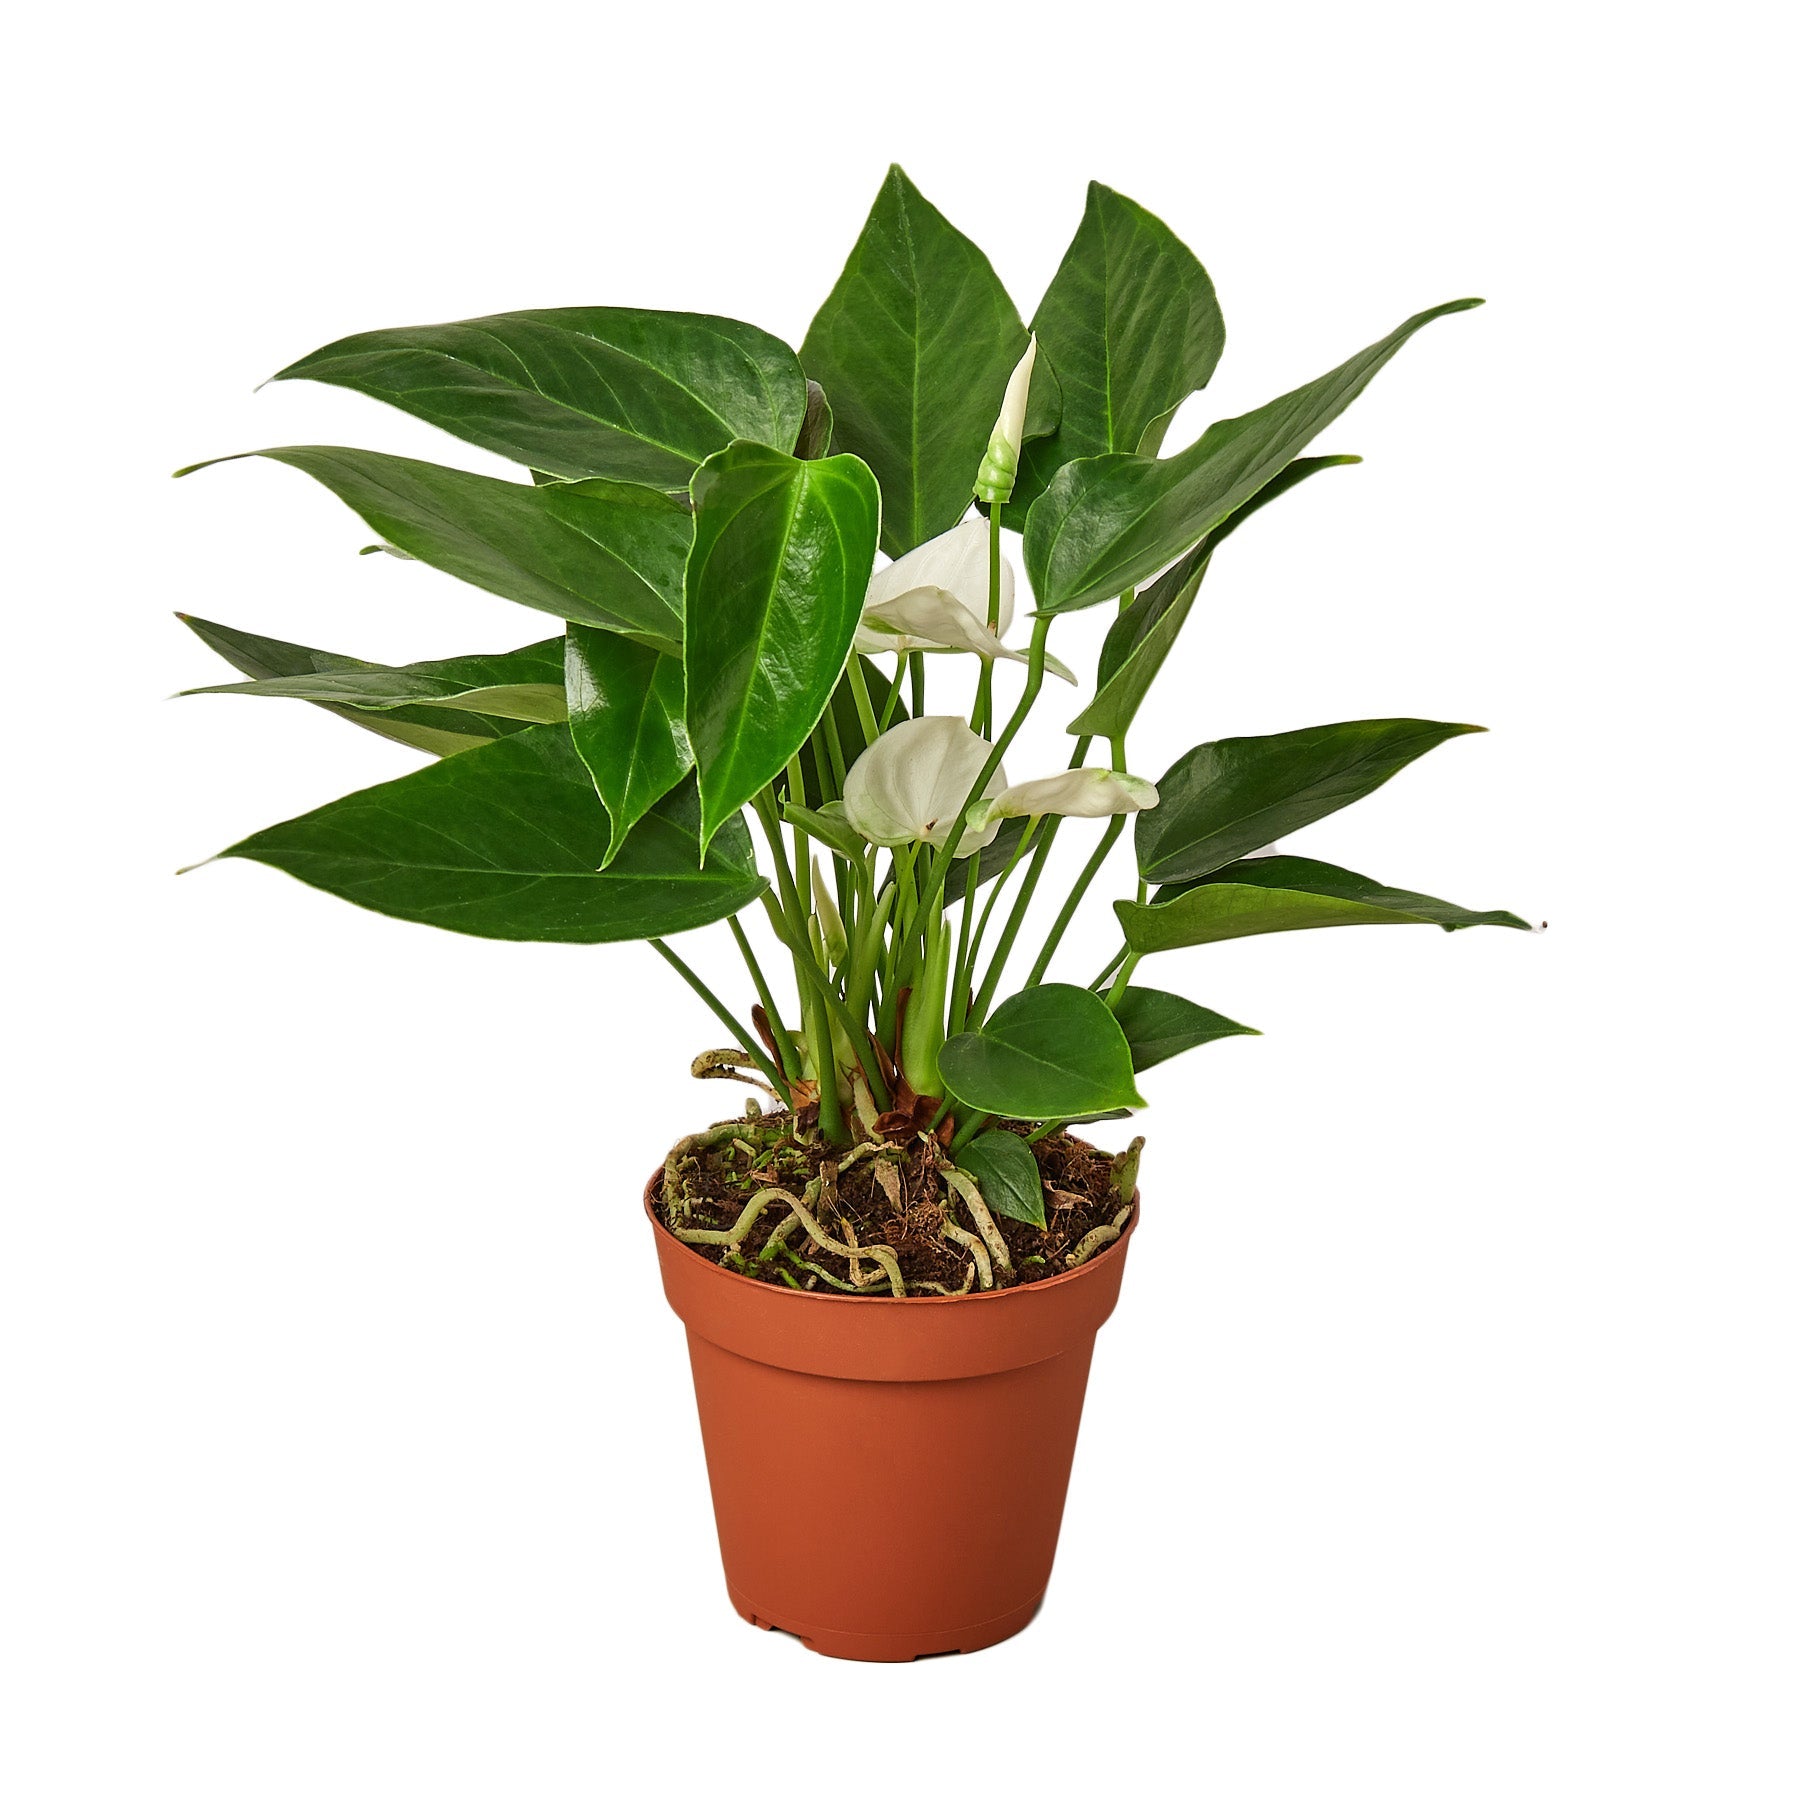 Peace lily in a pot on a white background, available at the best plant nursery near me.